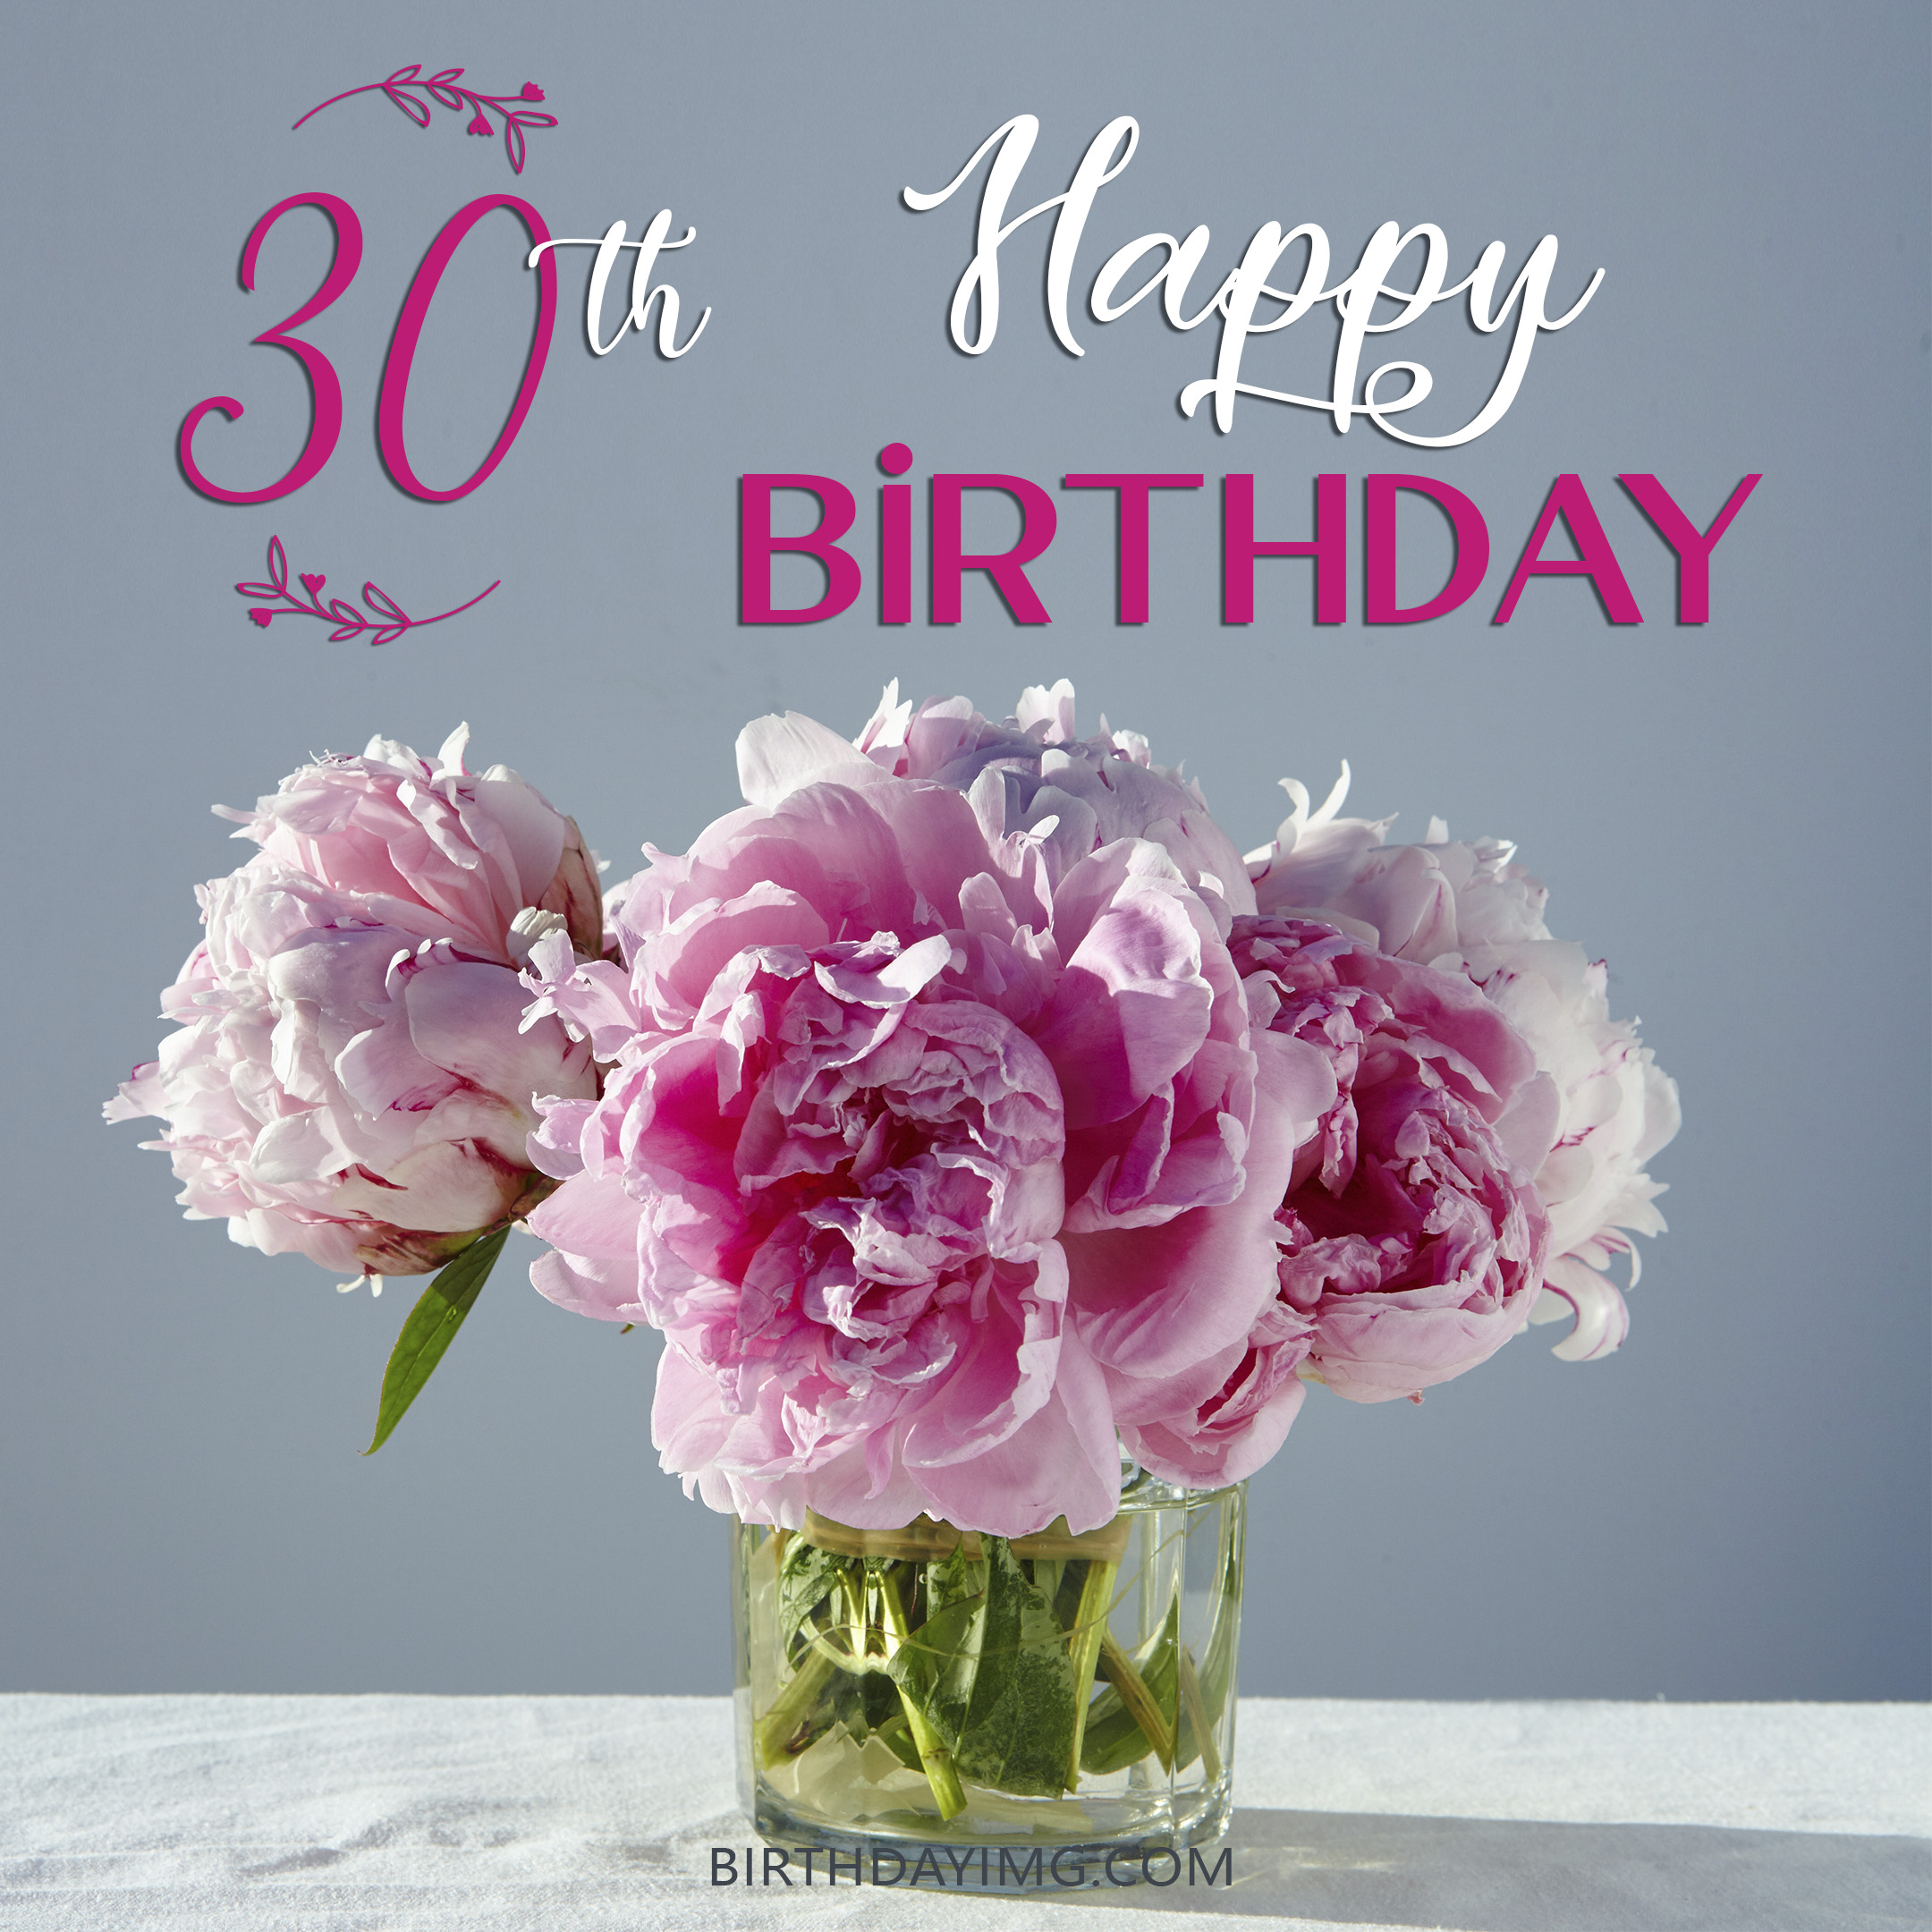 Free 30th Years Happy Birthday Image With Peonies in Vase